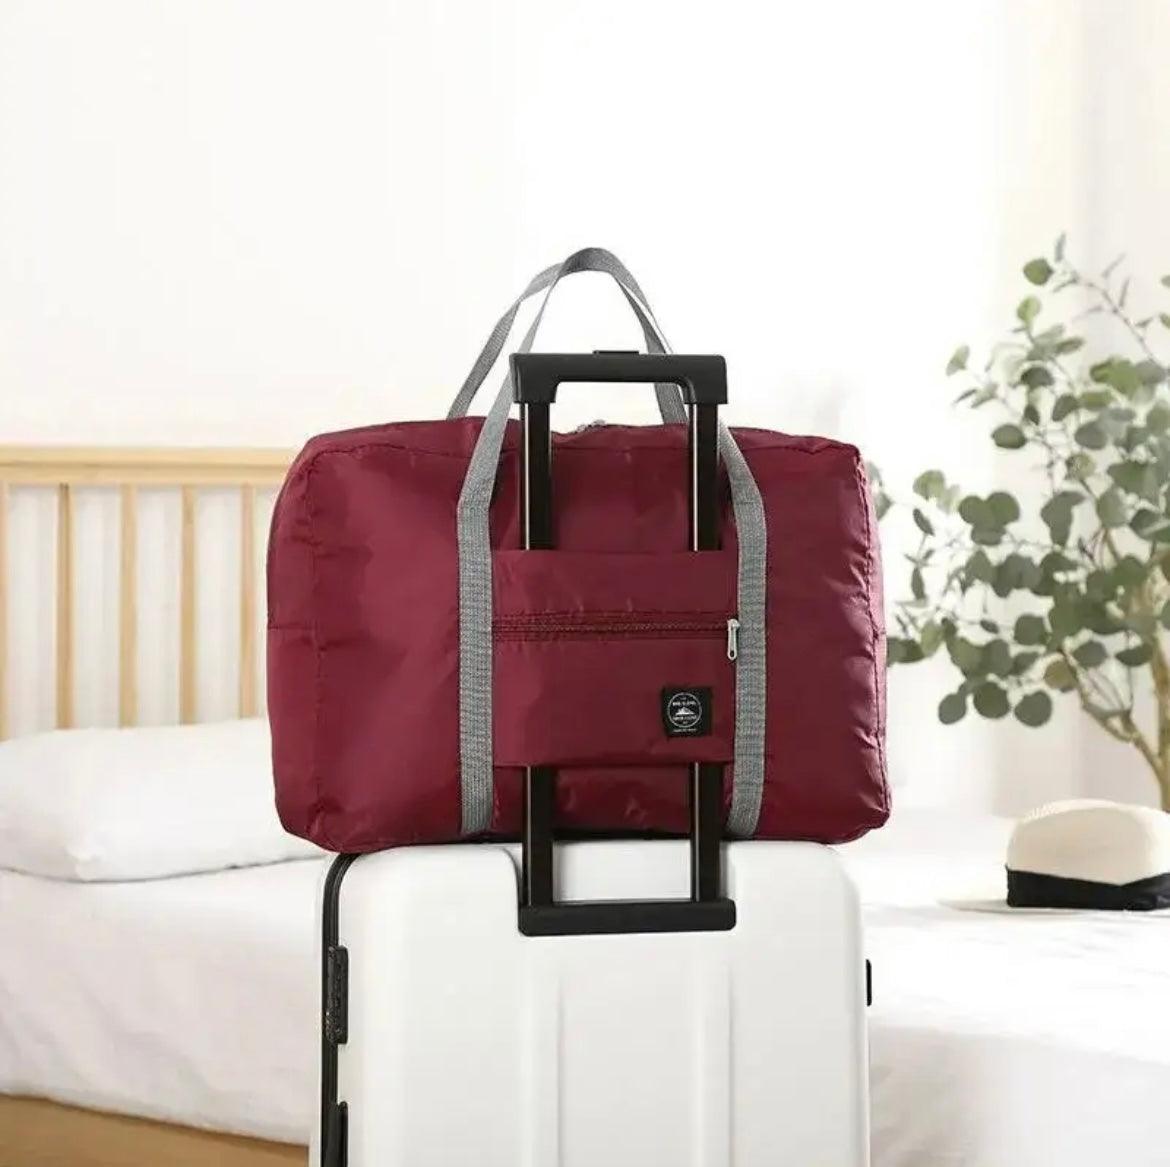 Rose and Teddy Travel Bag | Under seat Travel Bag